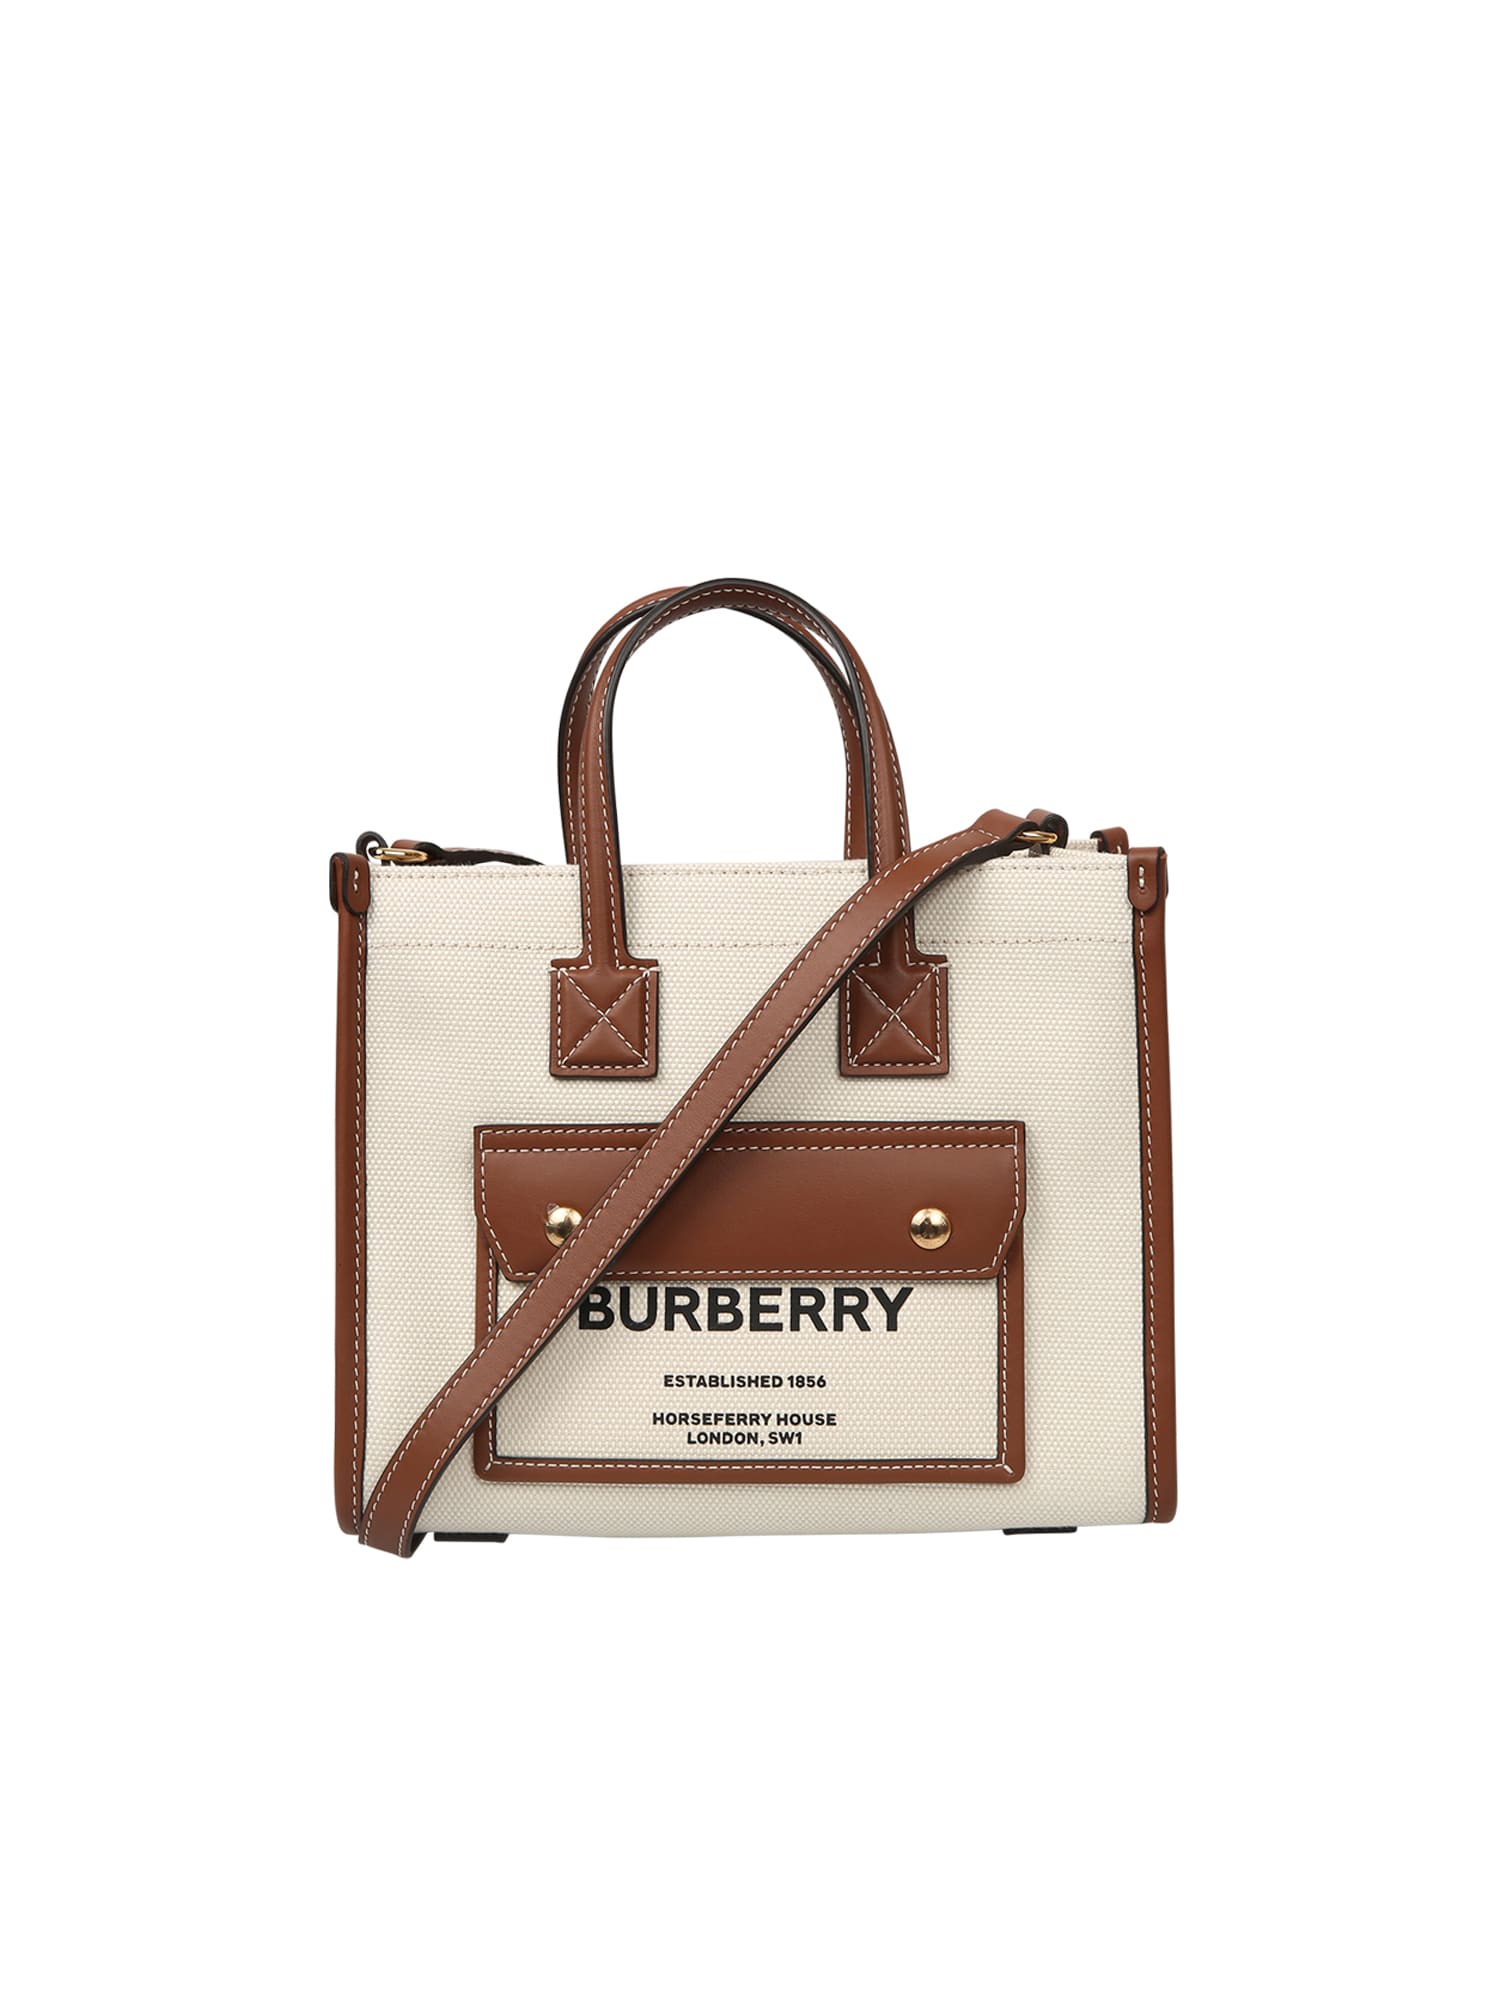 Burberry New Tote Bag